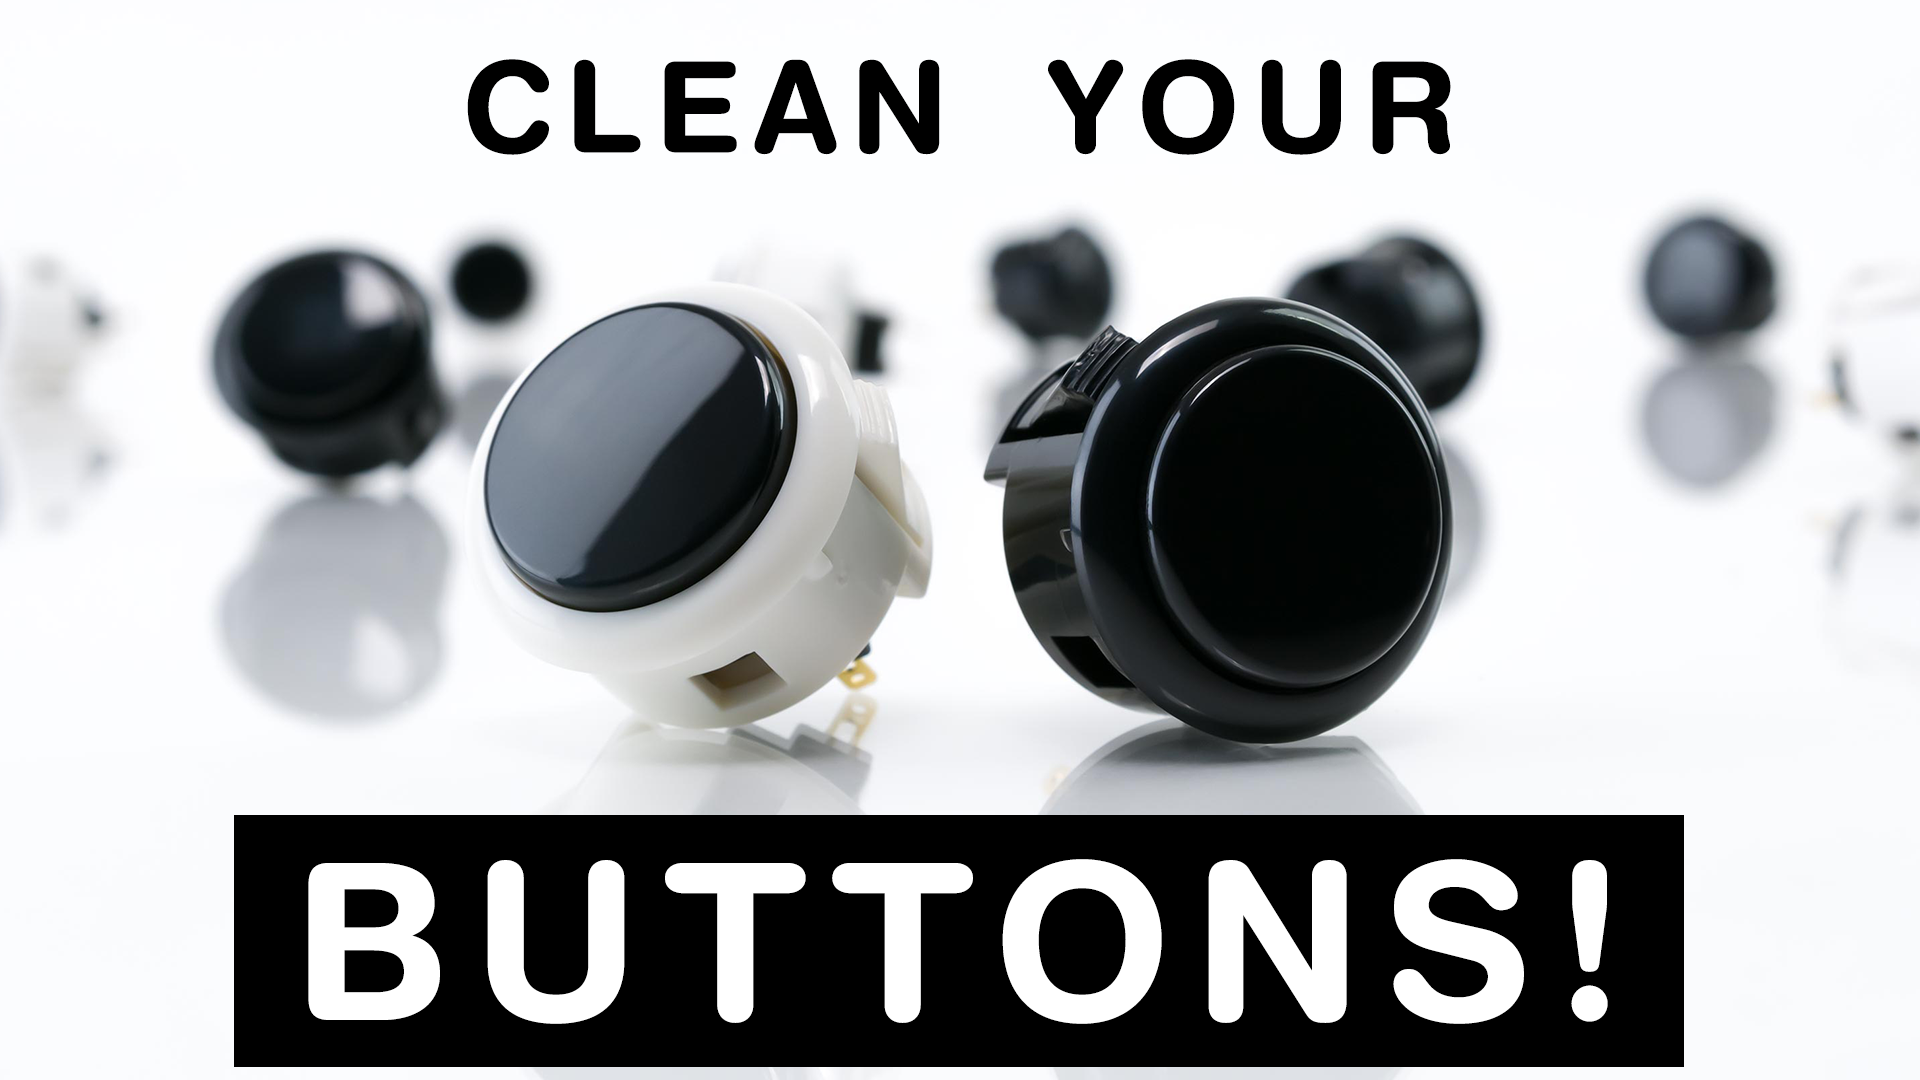 How To Clean Your Buttons